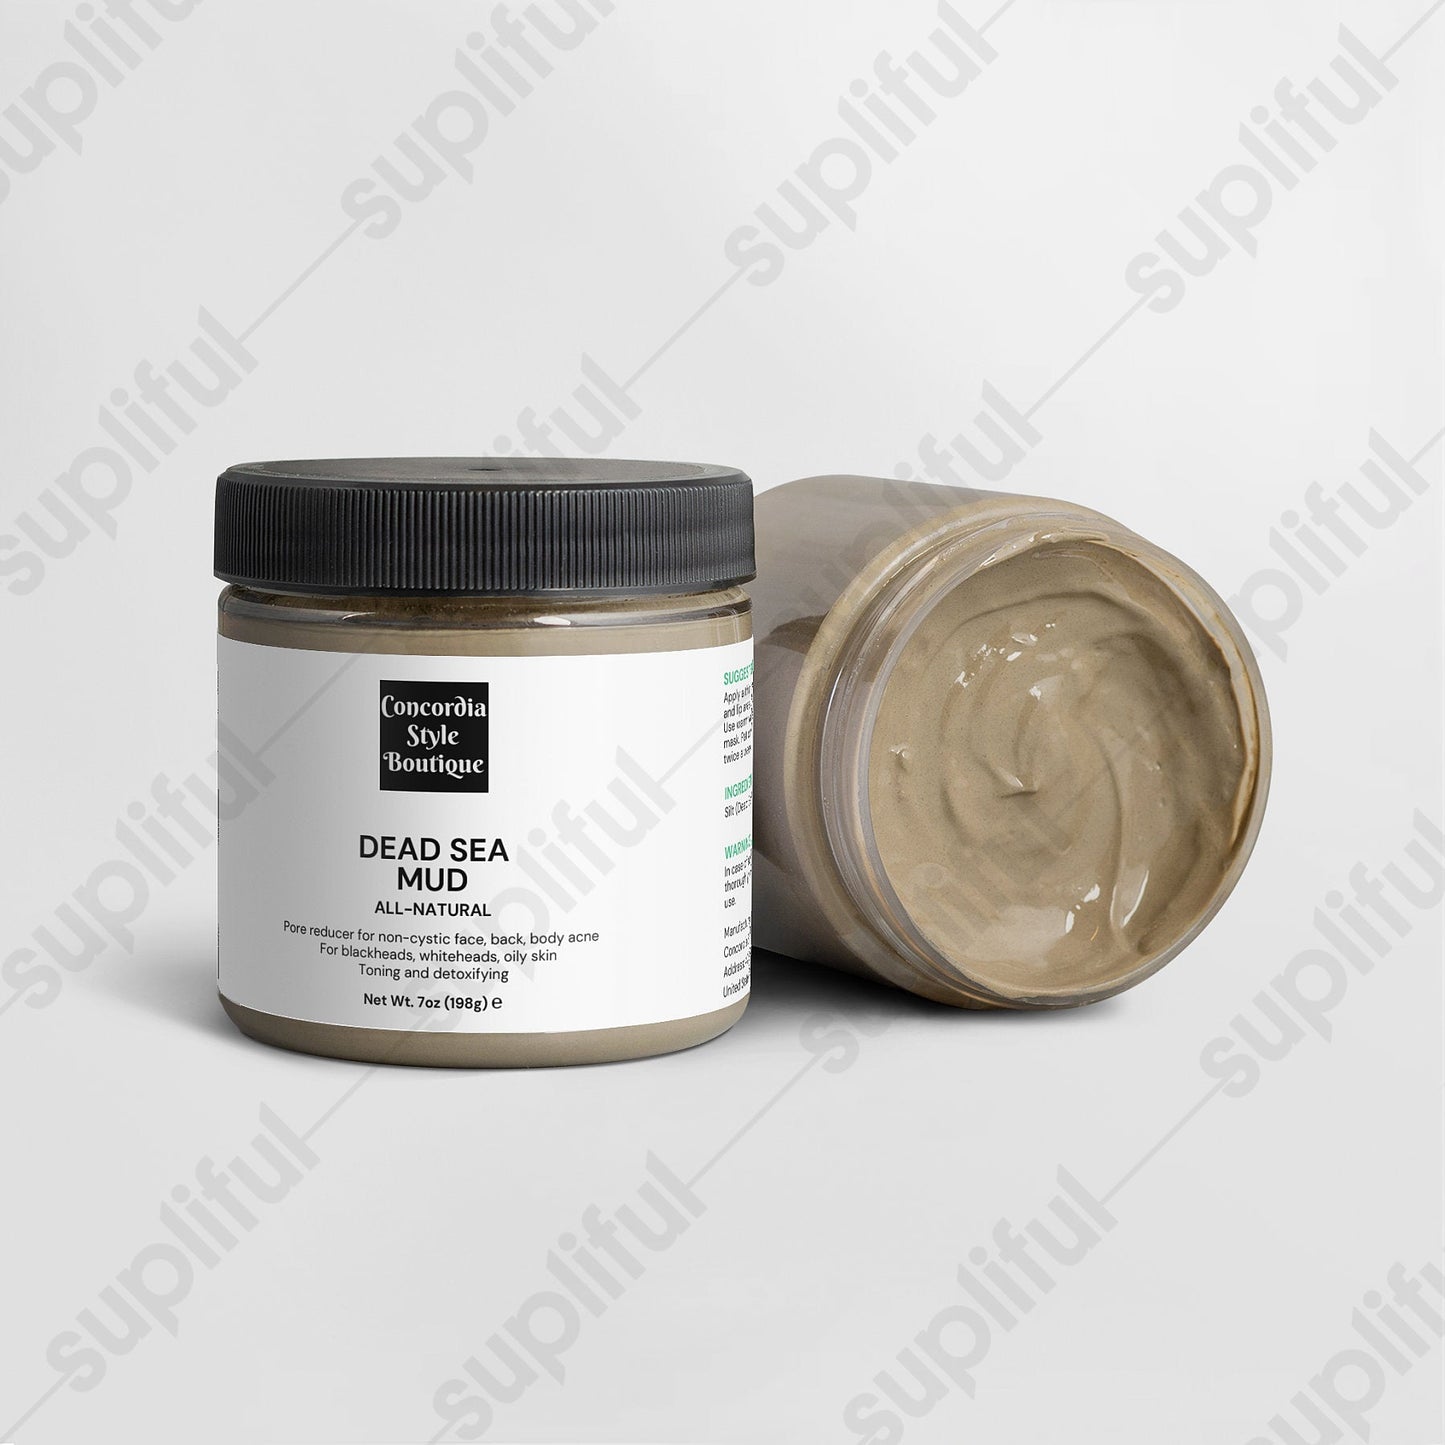 Dead Sea Mud - Ships exclusively to US - Premium Dead Sea Mud from Concordia Style Boutique - Just $23.95! Shop now at Concordia Style Boutique